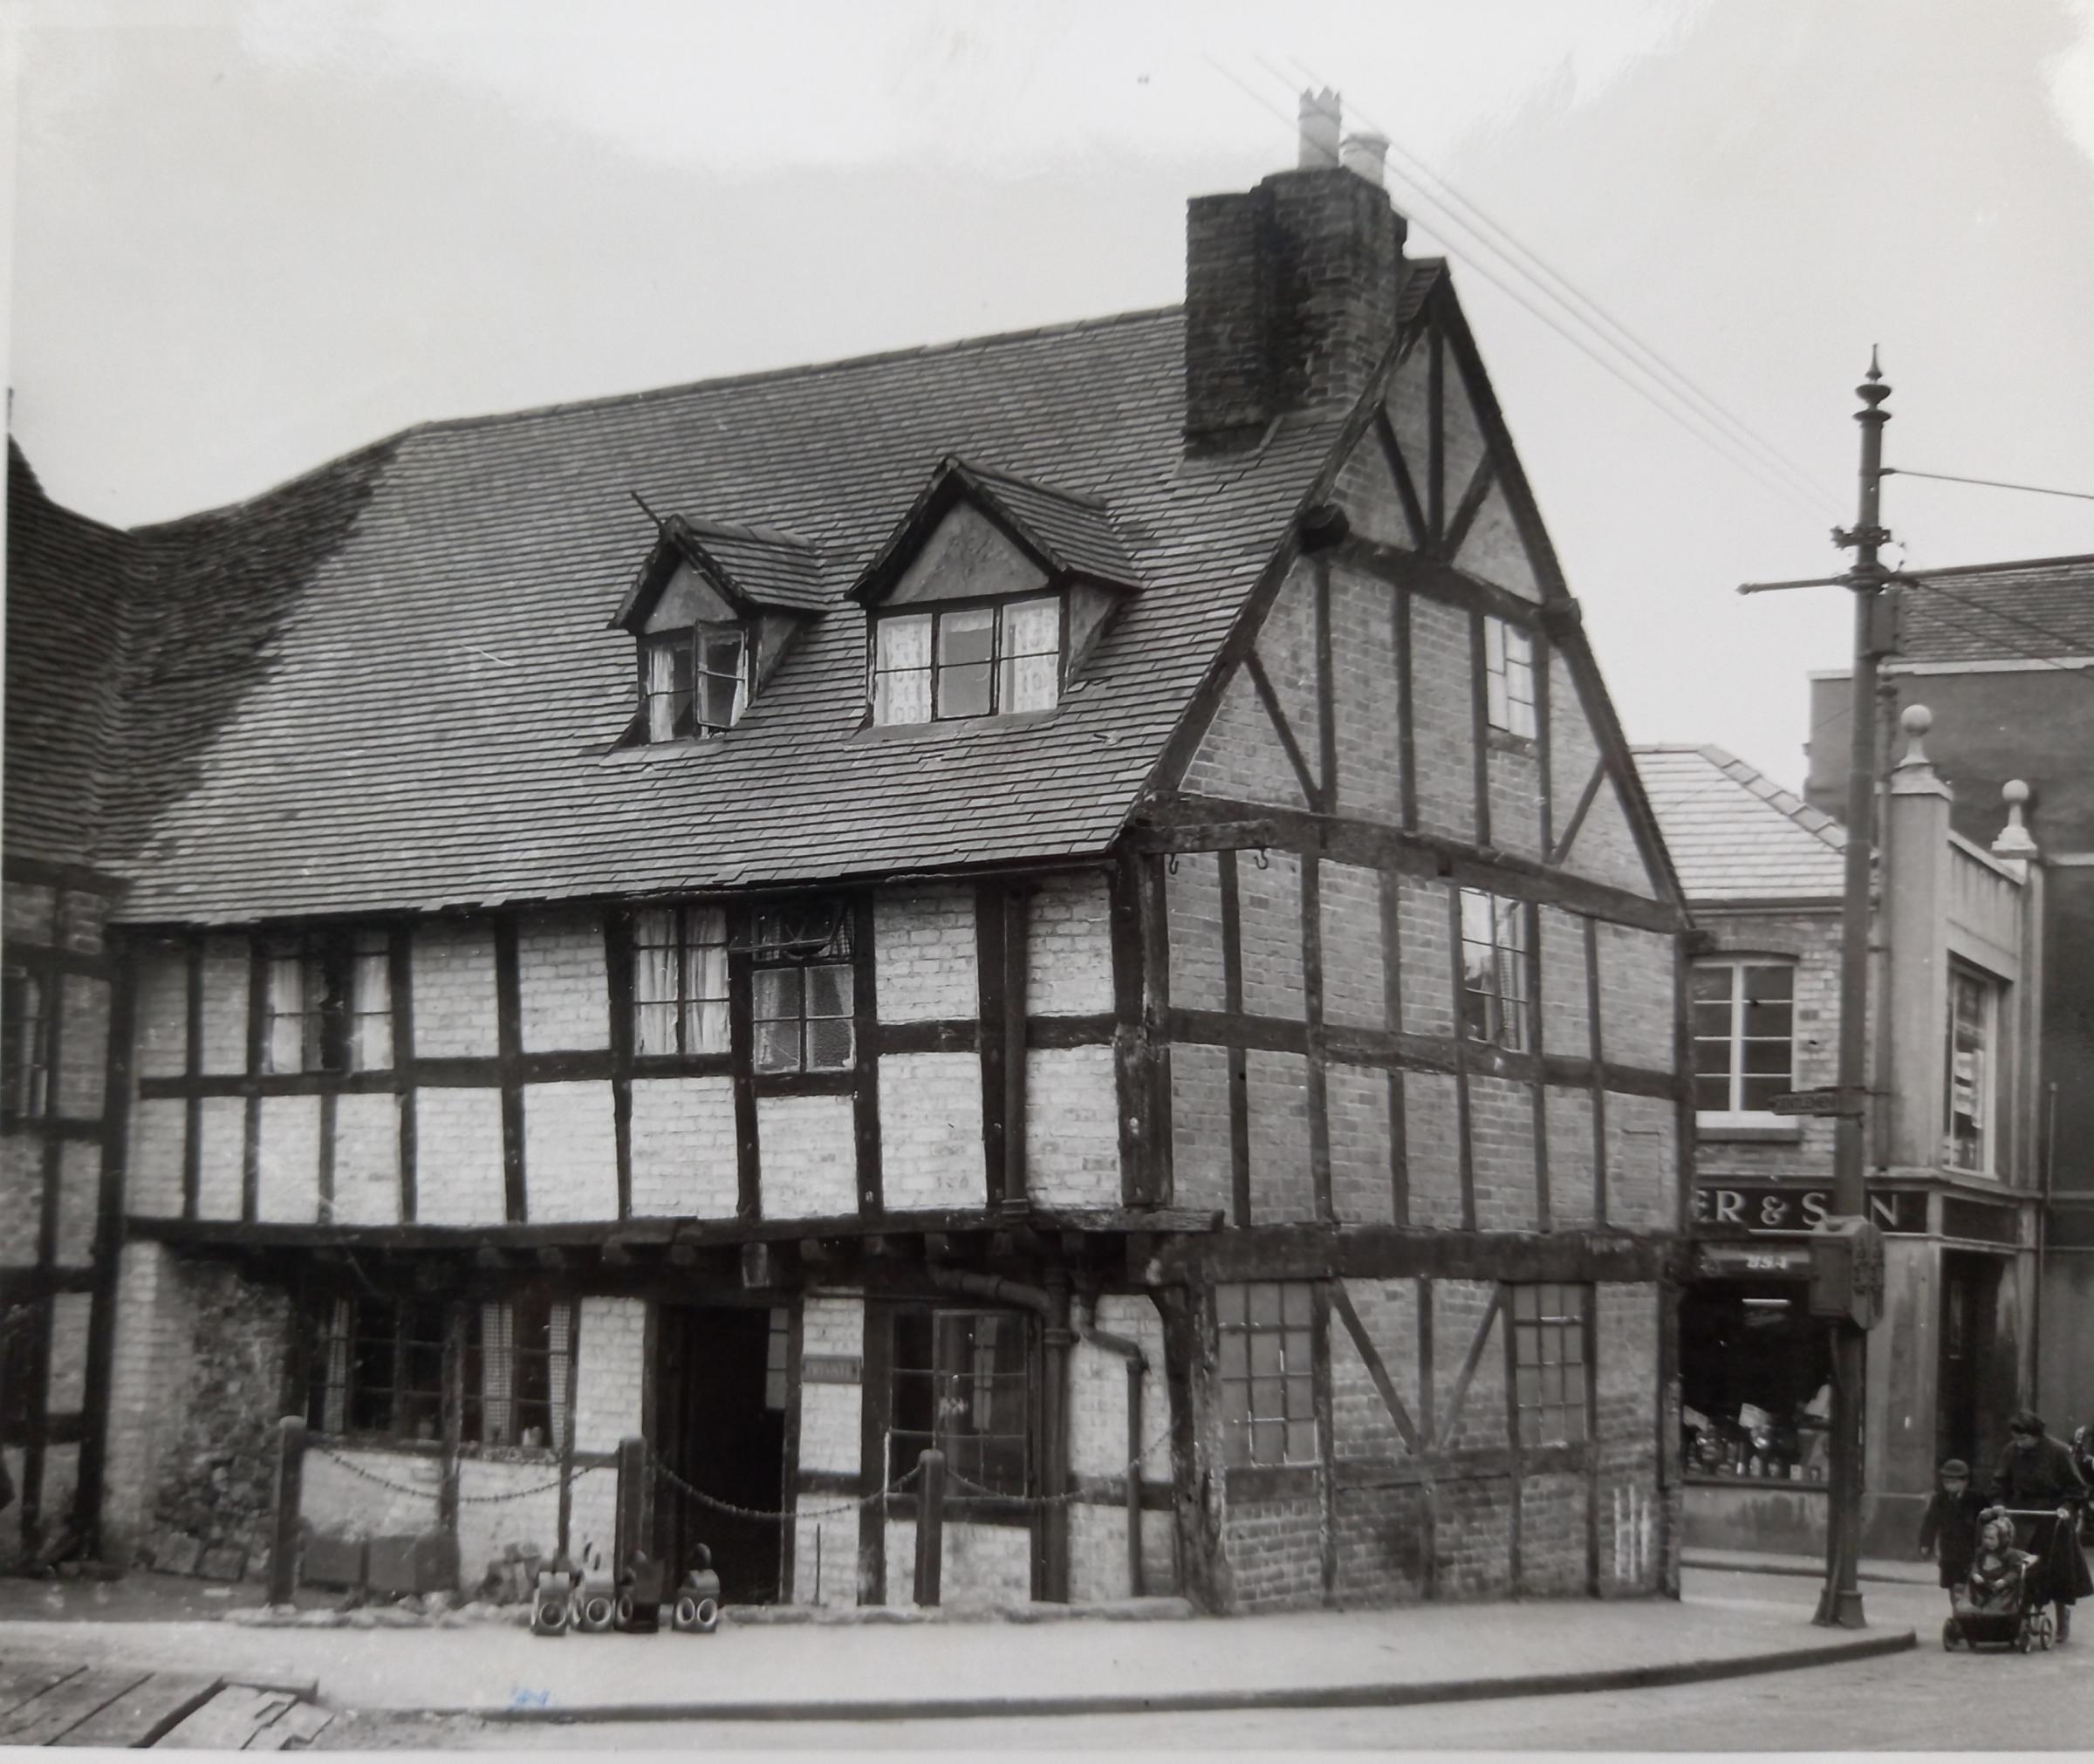 This wonderful old property stood where St Peter’s  Street met Sidbury with Bladders on the corner. It was demolished in the 1950s